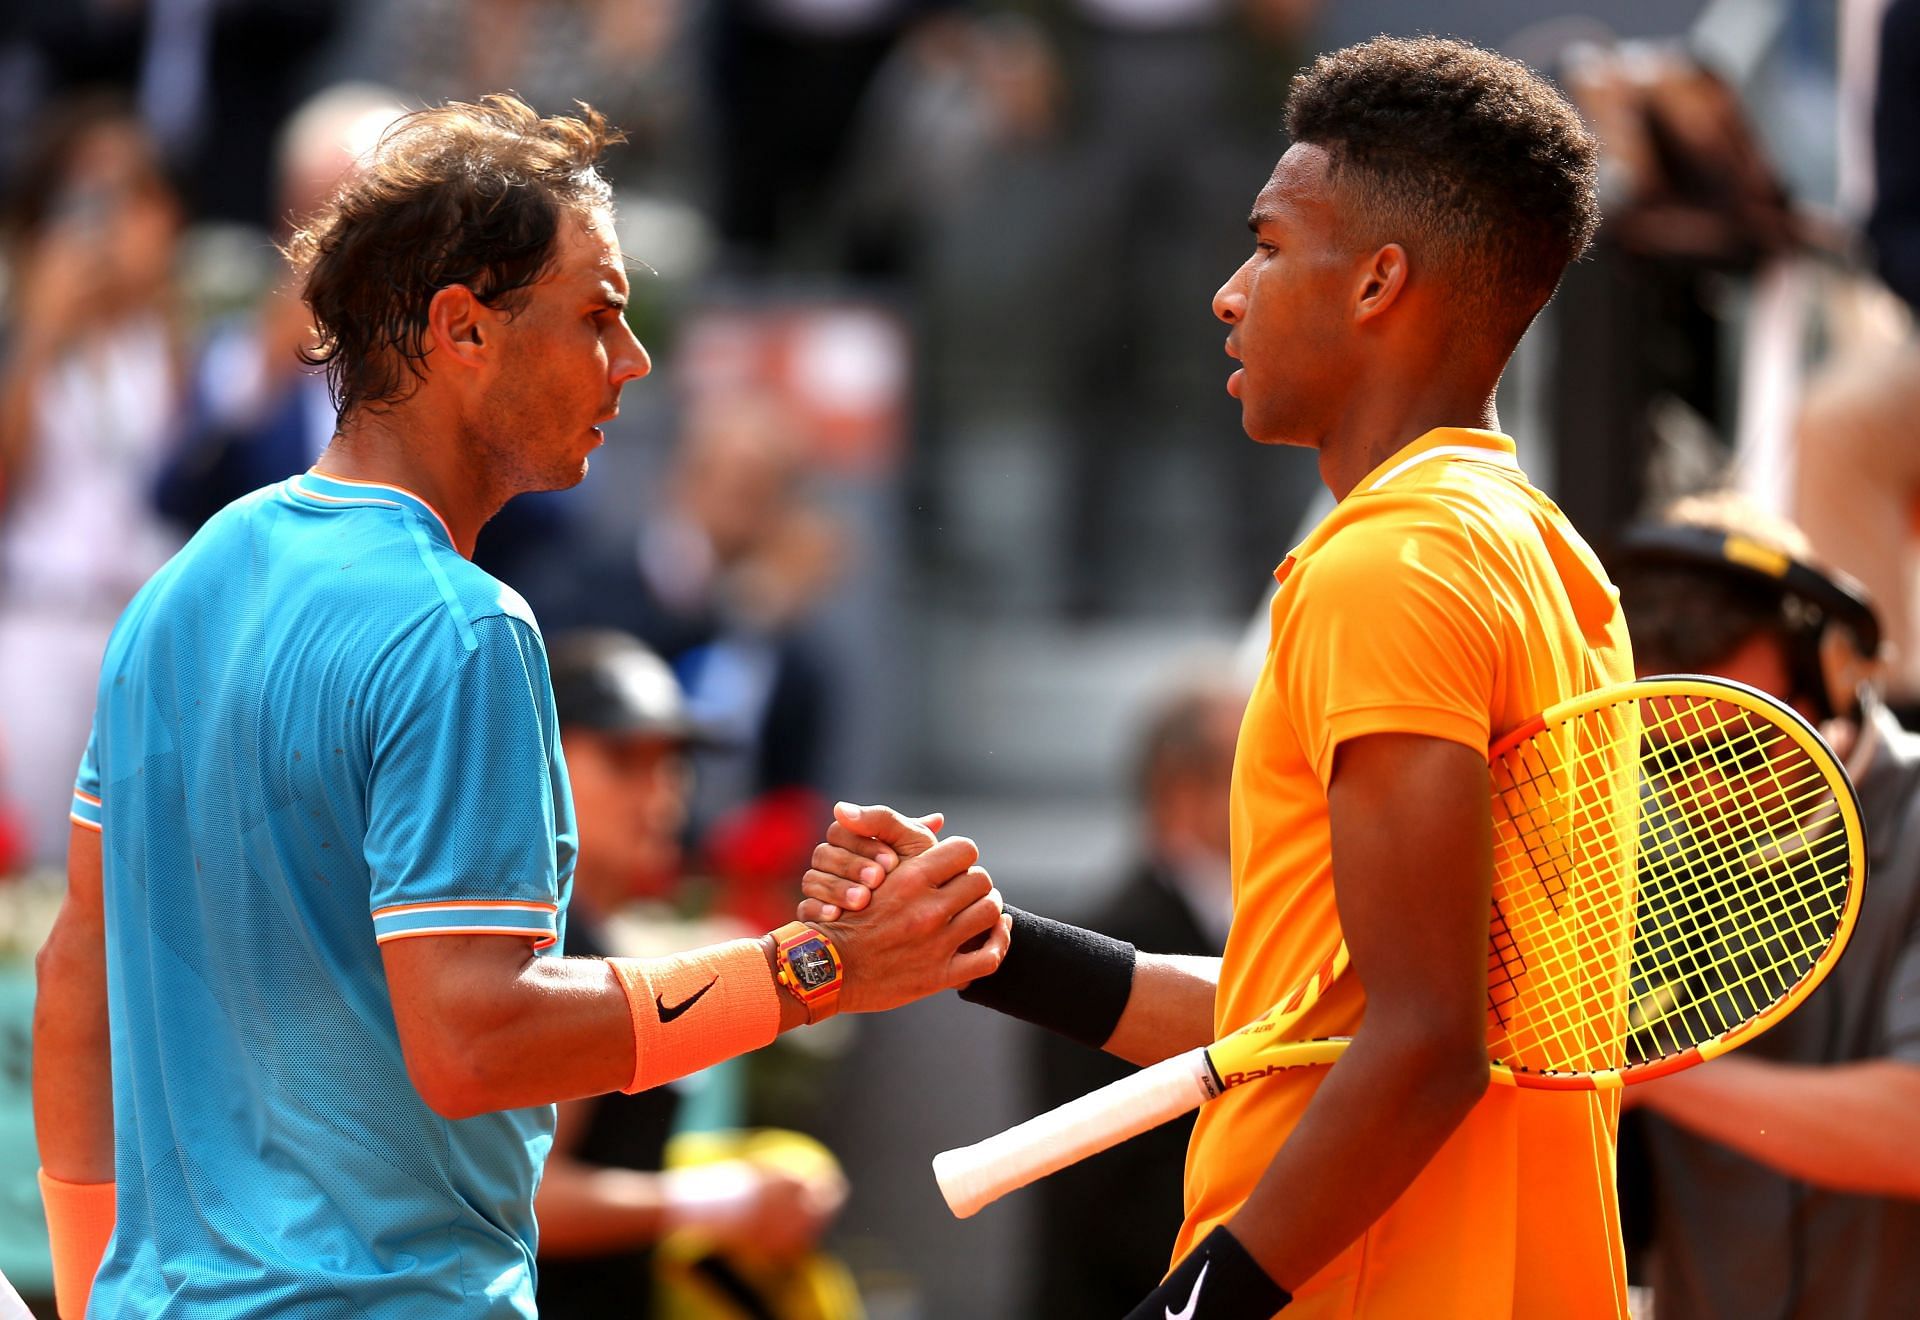 Rafael Nadal and Felix Auger-Aliassime at the 2019 Madrid Open.